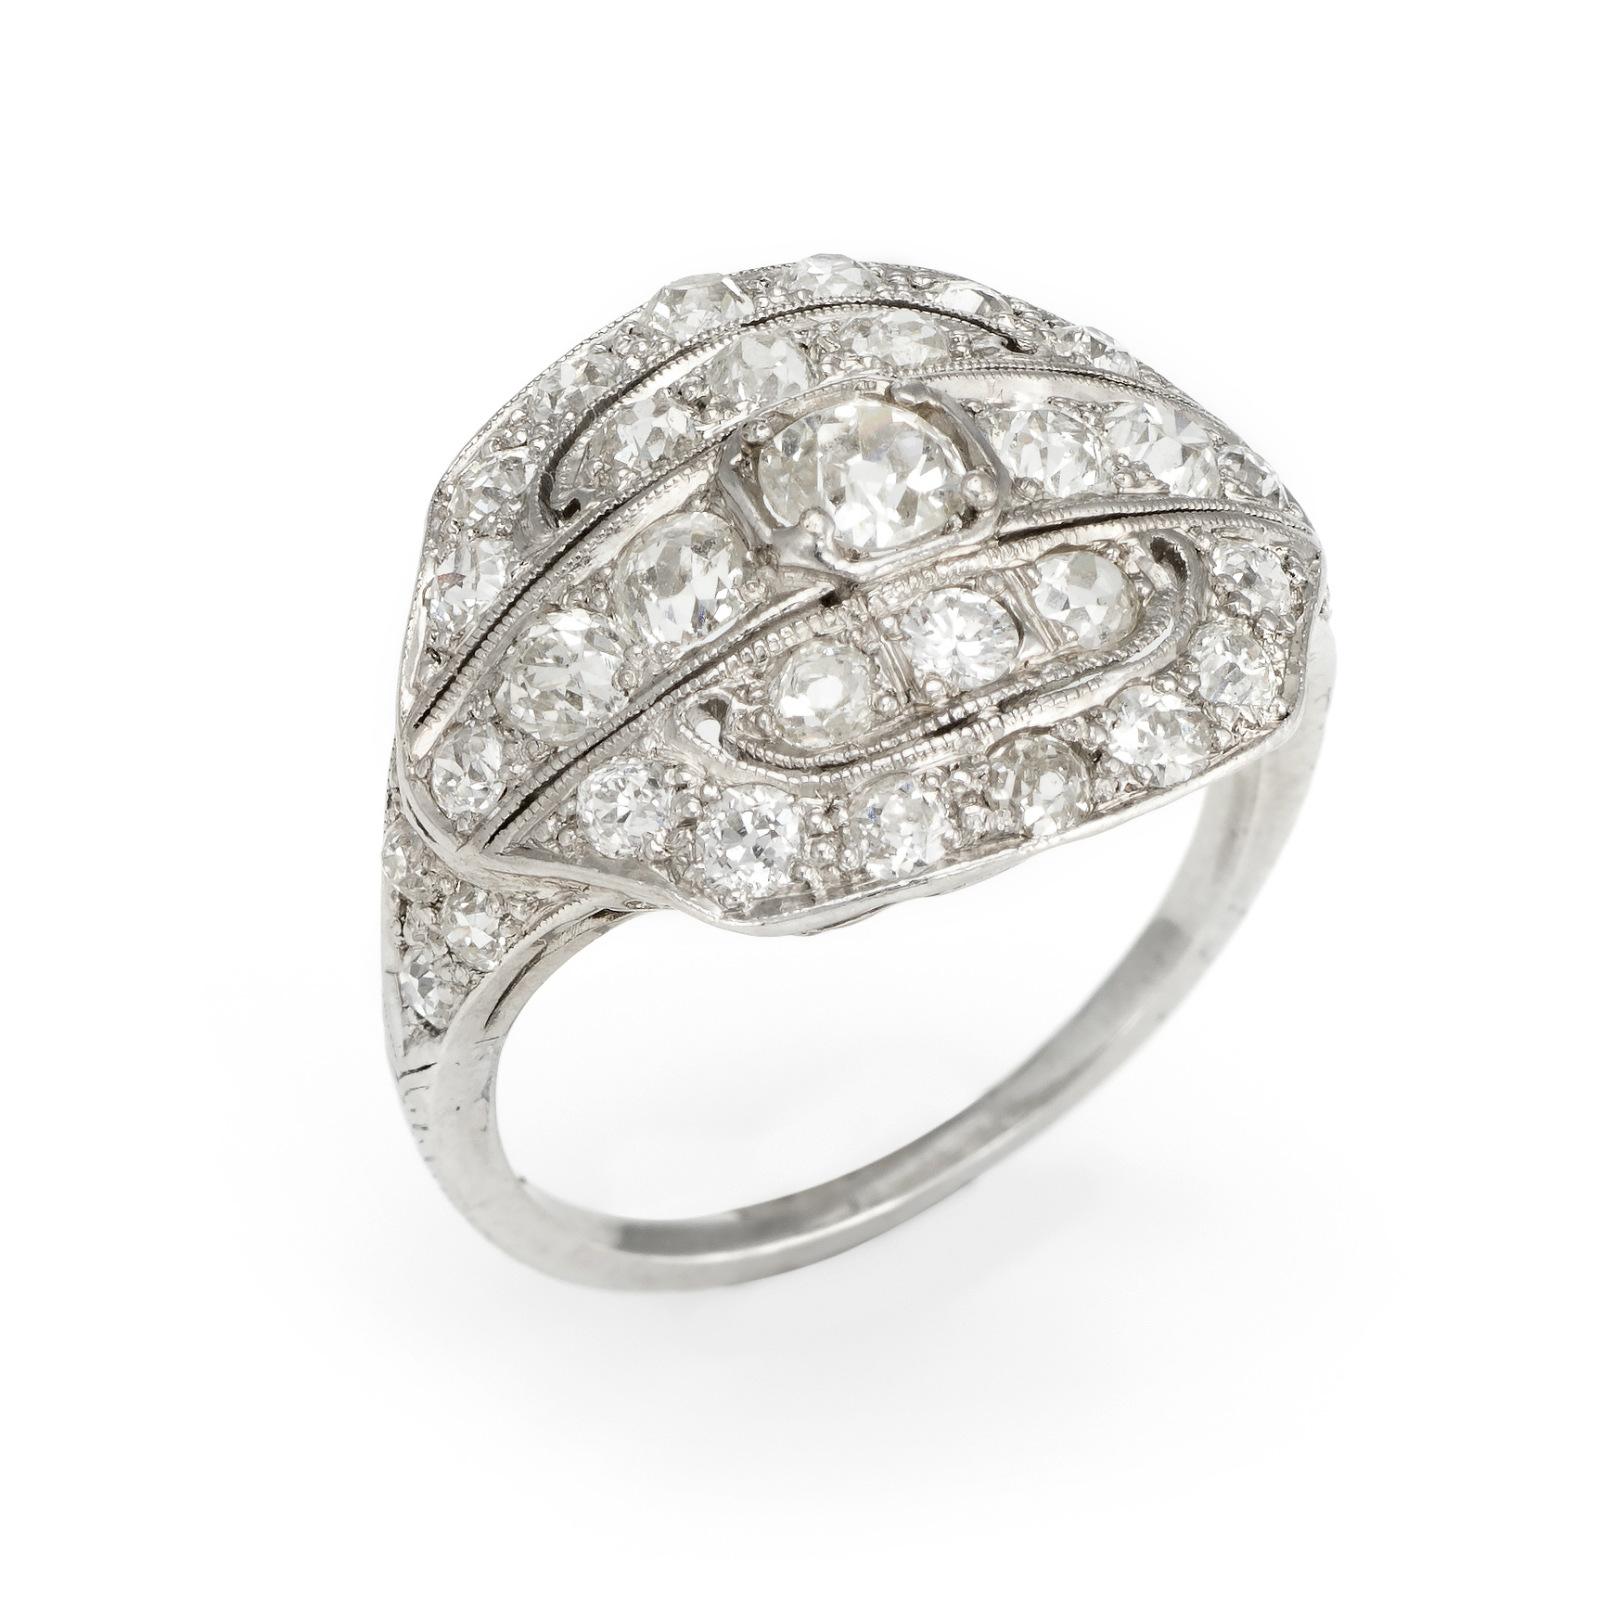 Elegant & finely detailed Art Deco era ring (circa 1920s to 1930s), crafted in 900 platinum. 

Old mine cut diamonds graduate in size from 0.33 carats (center) to 0.10 (4), 0.08 (8), 0.05 (14) and 0.03 (6). The total diamond weight is estimated at